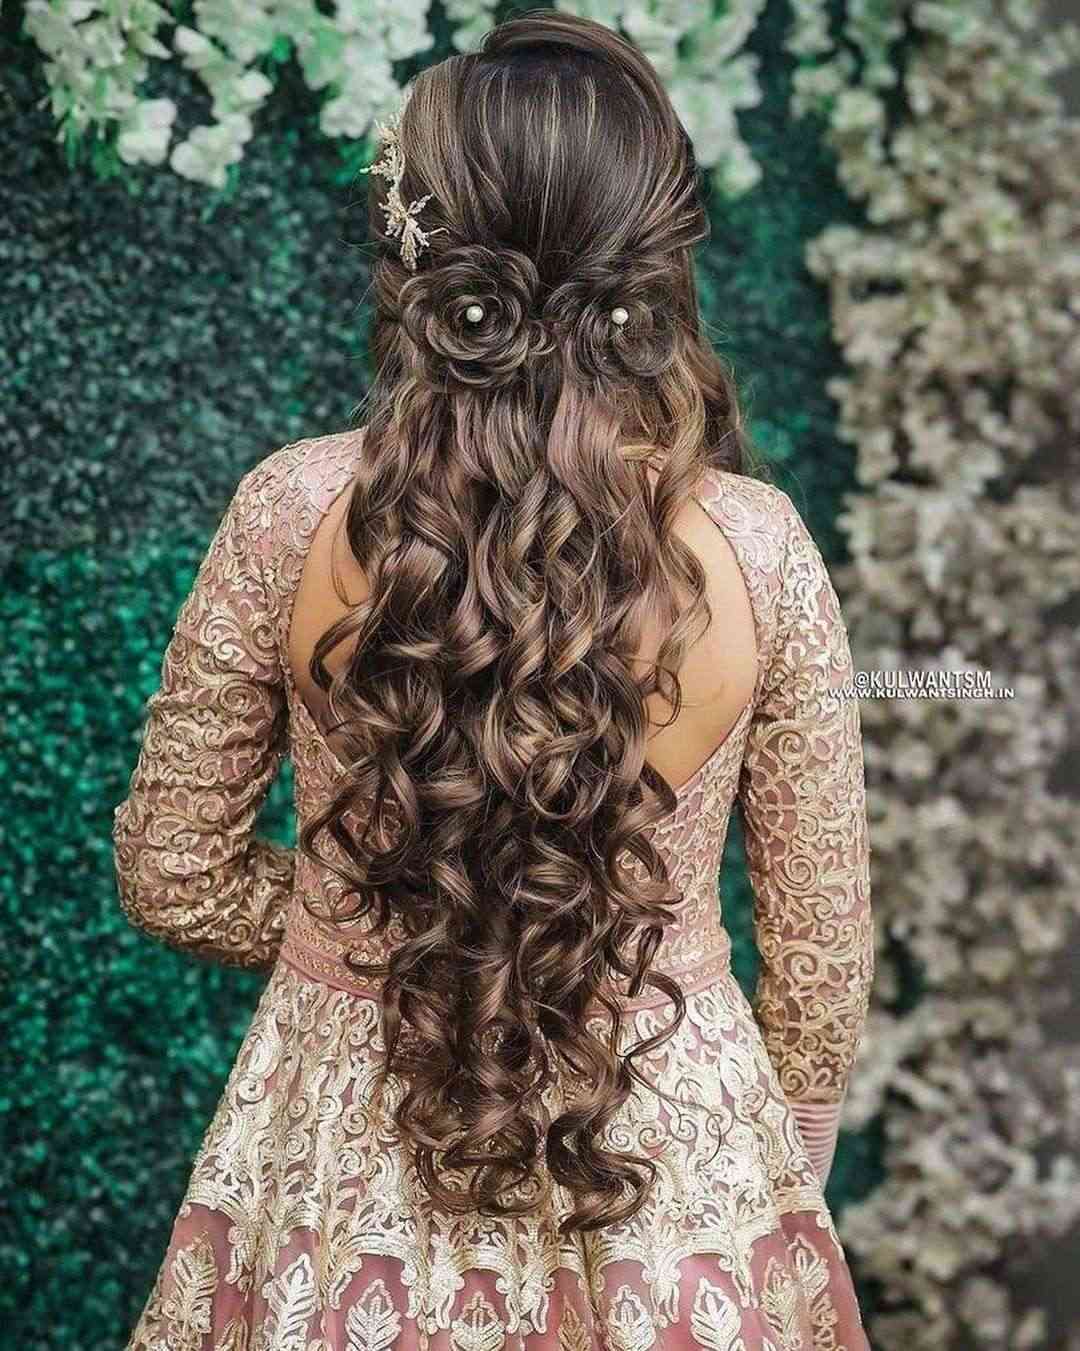 Add Bling To Your Cocktail Look With Stone-Studded Hairdo - ShaadiWish |  Hairstyles for gowns, Hairdo, Indian bridal hairstyles